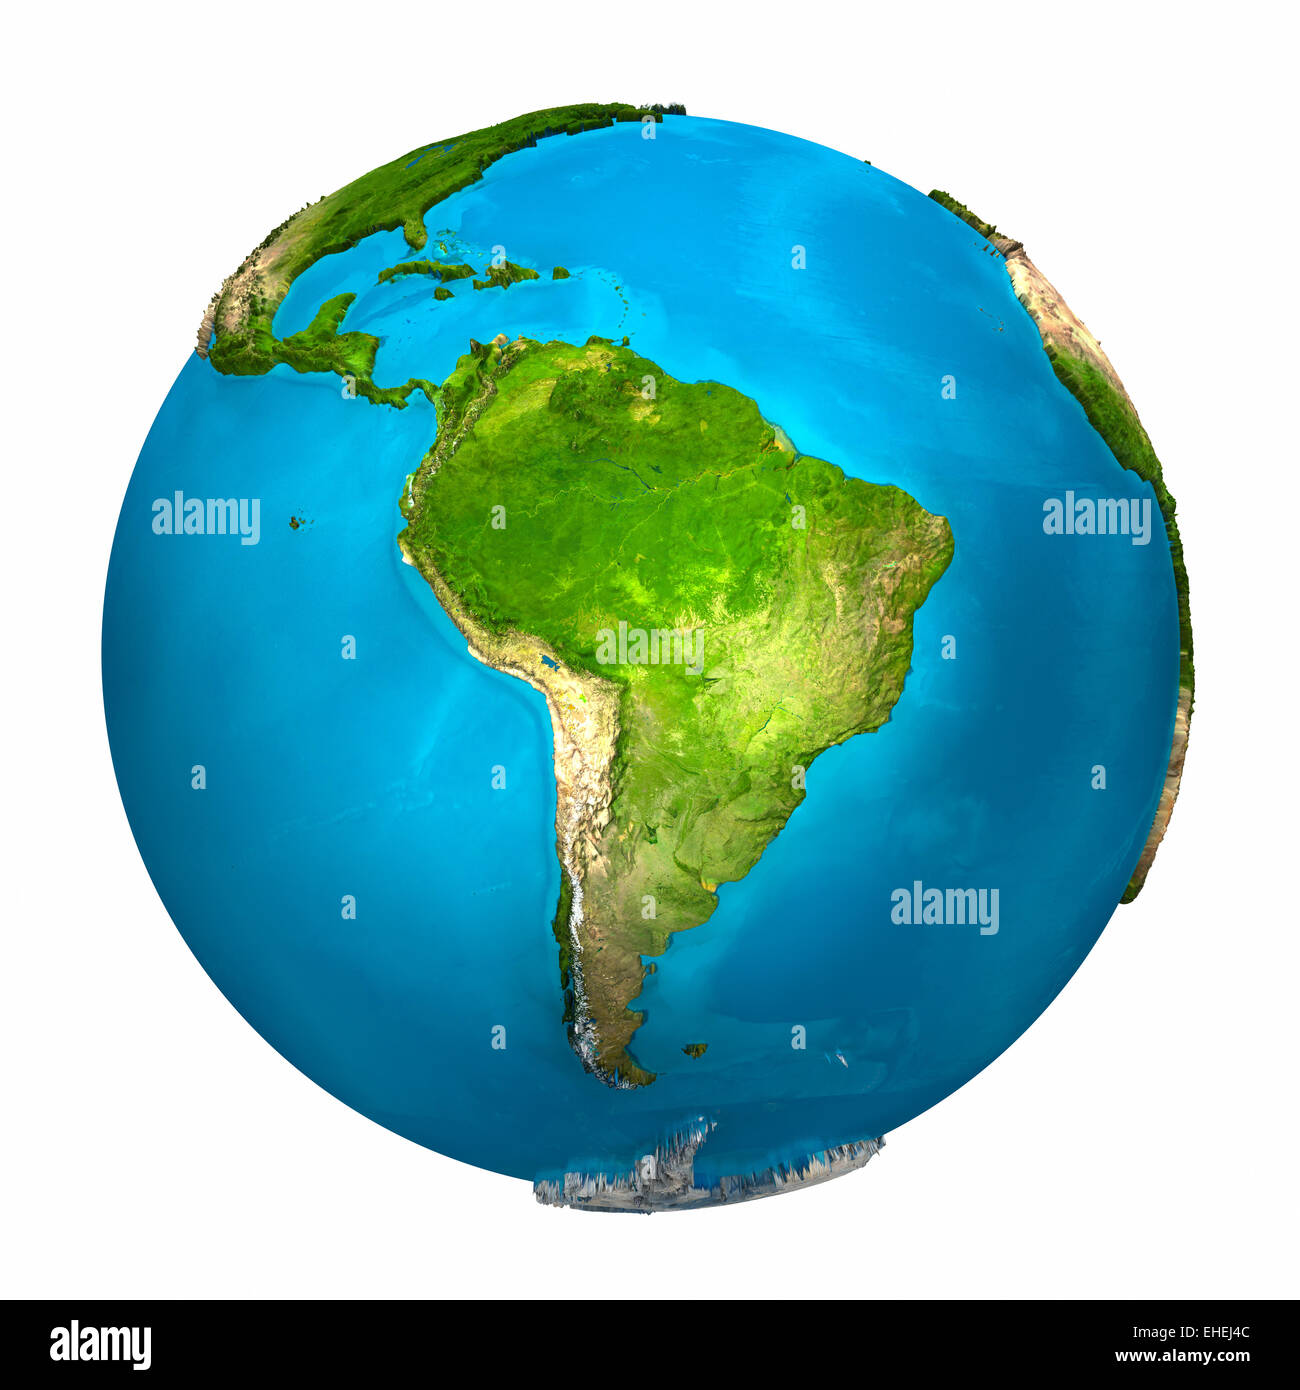 Planet Earth - South America Stock Photo